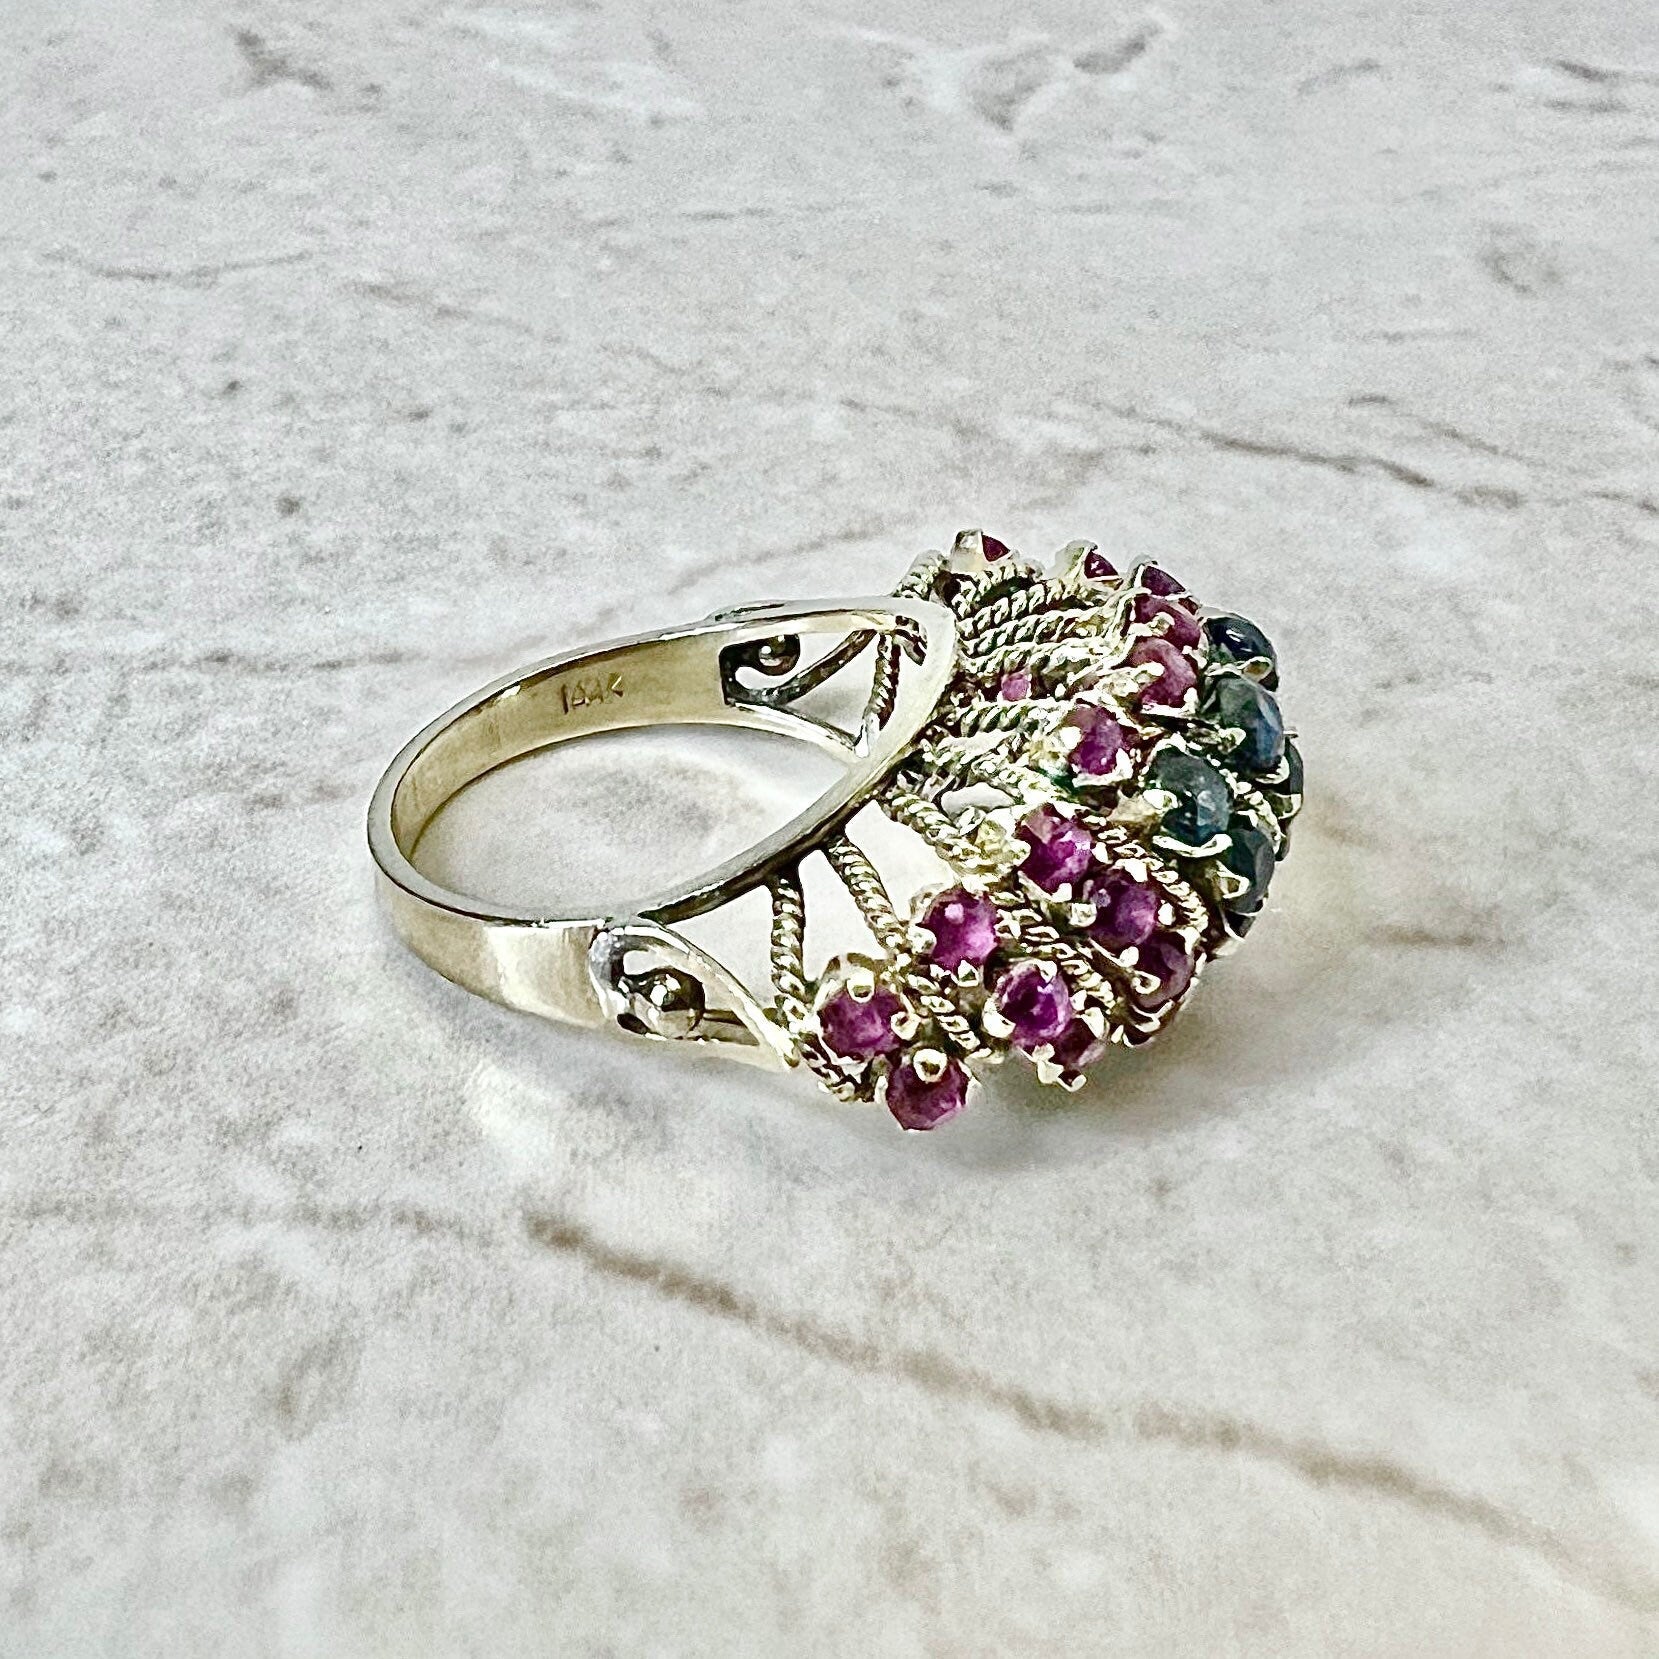 Vintage 14K Natural Ruby & Sapphire Cocktail Ring - Yellow Gold Dome Ring - Anniversary Ring - Best Birthday Gift For Her Size 6.50+ US